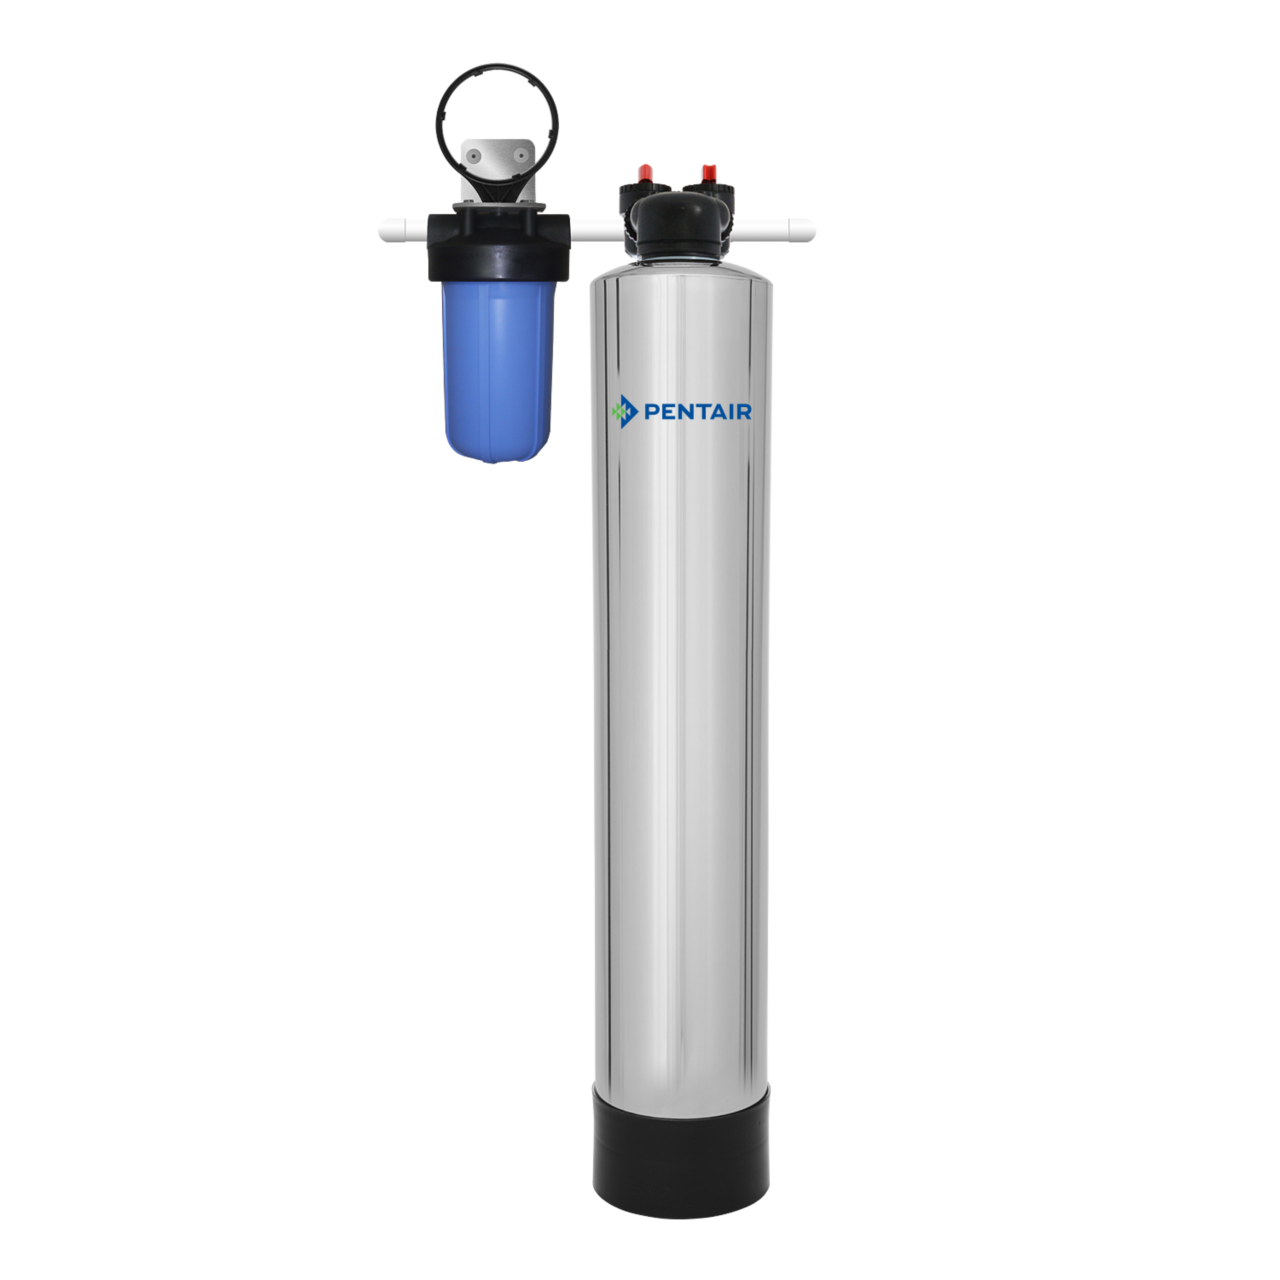 https://www.pentair.com/content/dam/extranet/web/nam/pentair-water-solutions/images/products/tank-carbon-filter-system.png.thumb.1280.1280.jpg